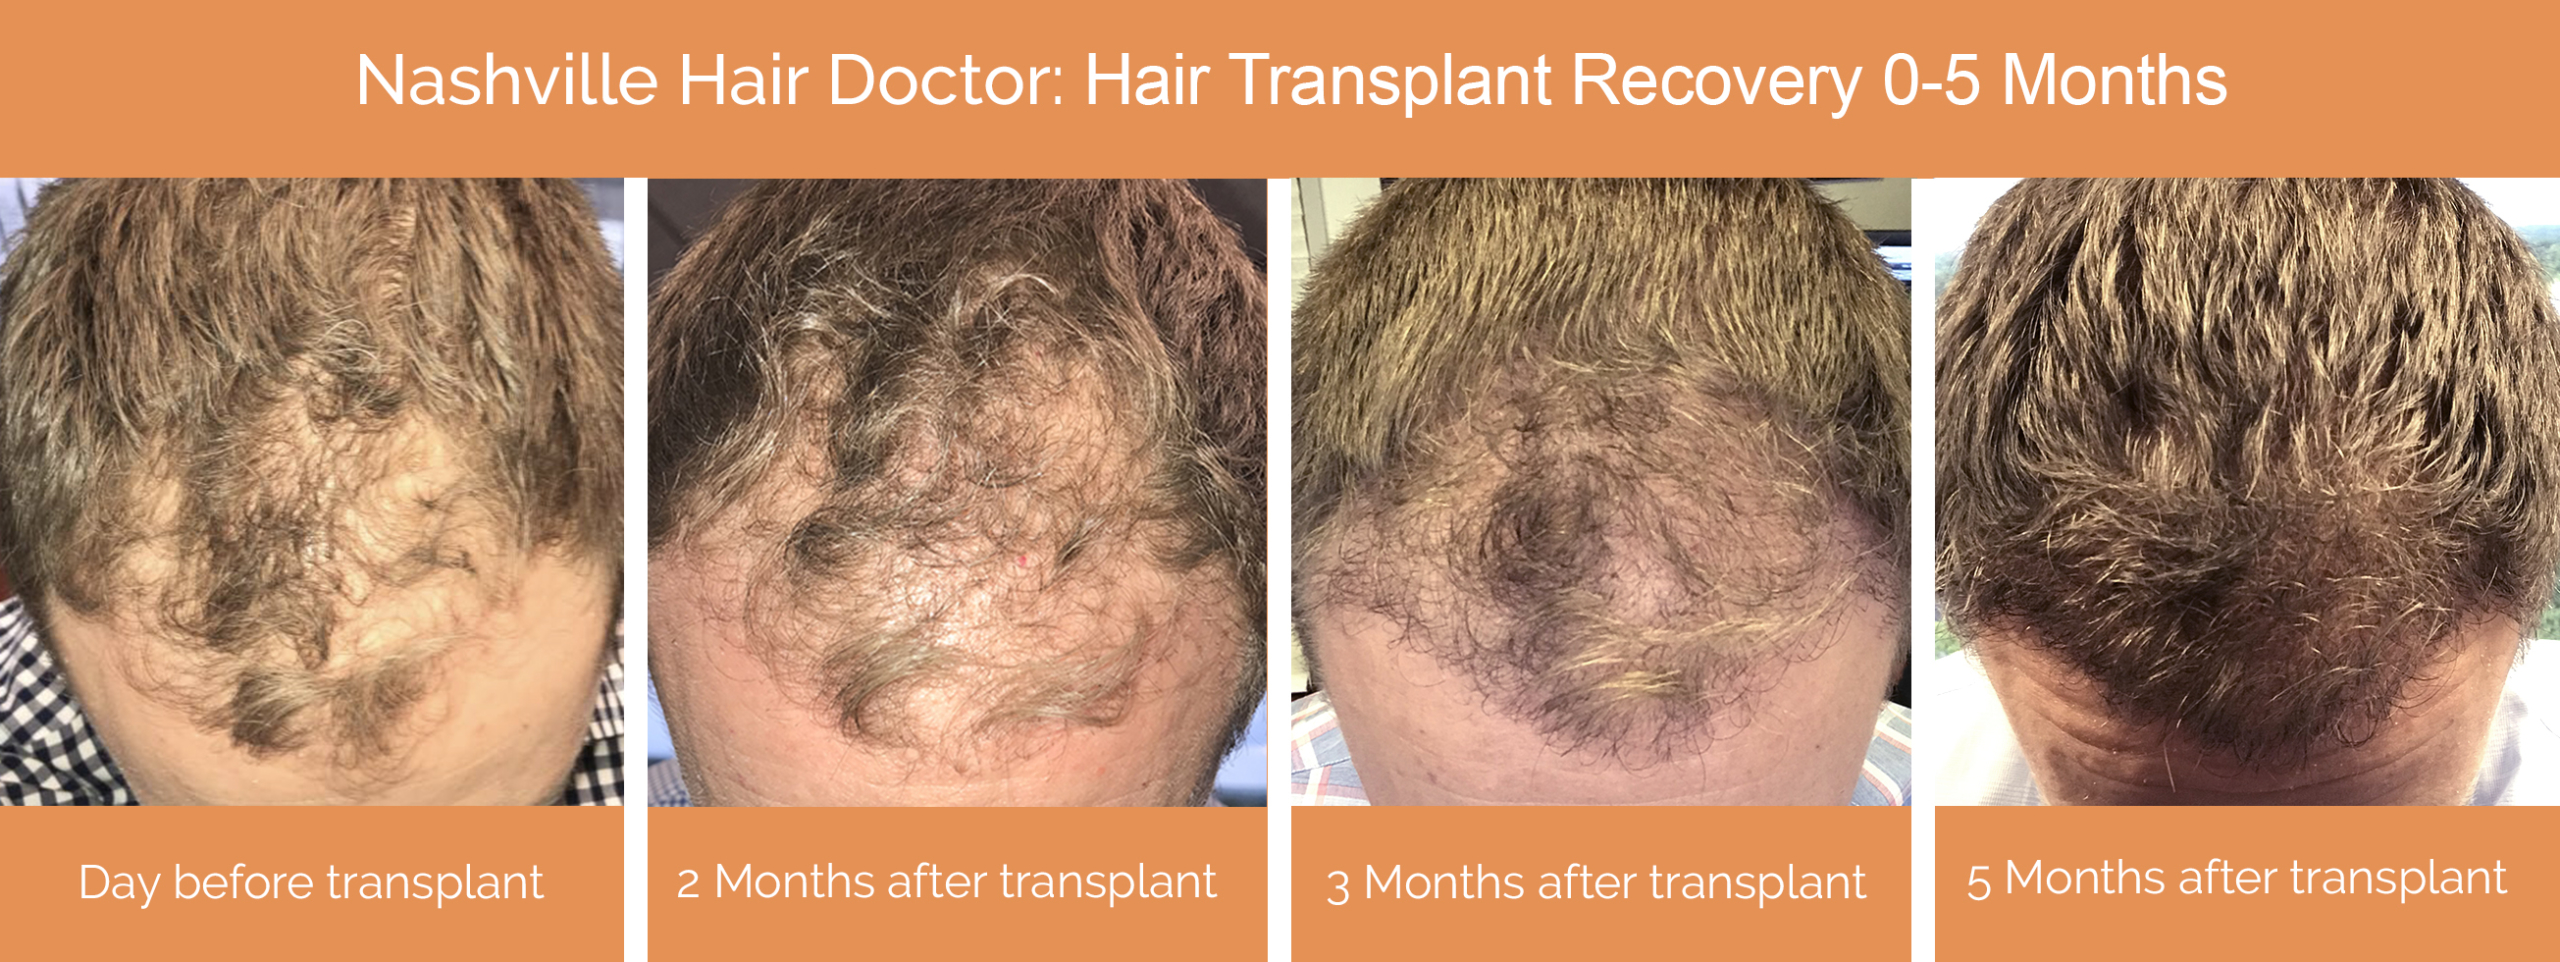 Nashville Hair Doctor patient recovery 0-5 months after hair transplant